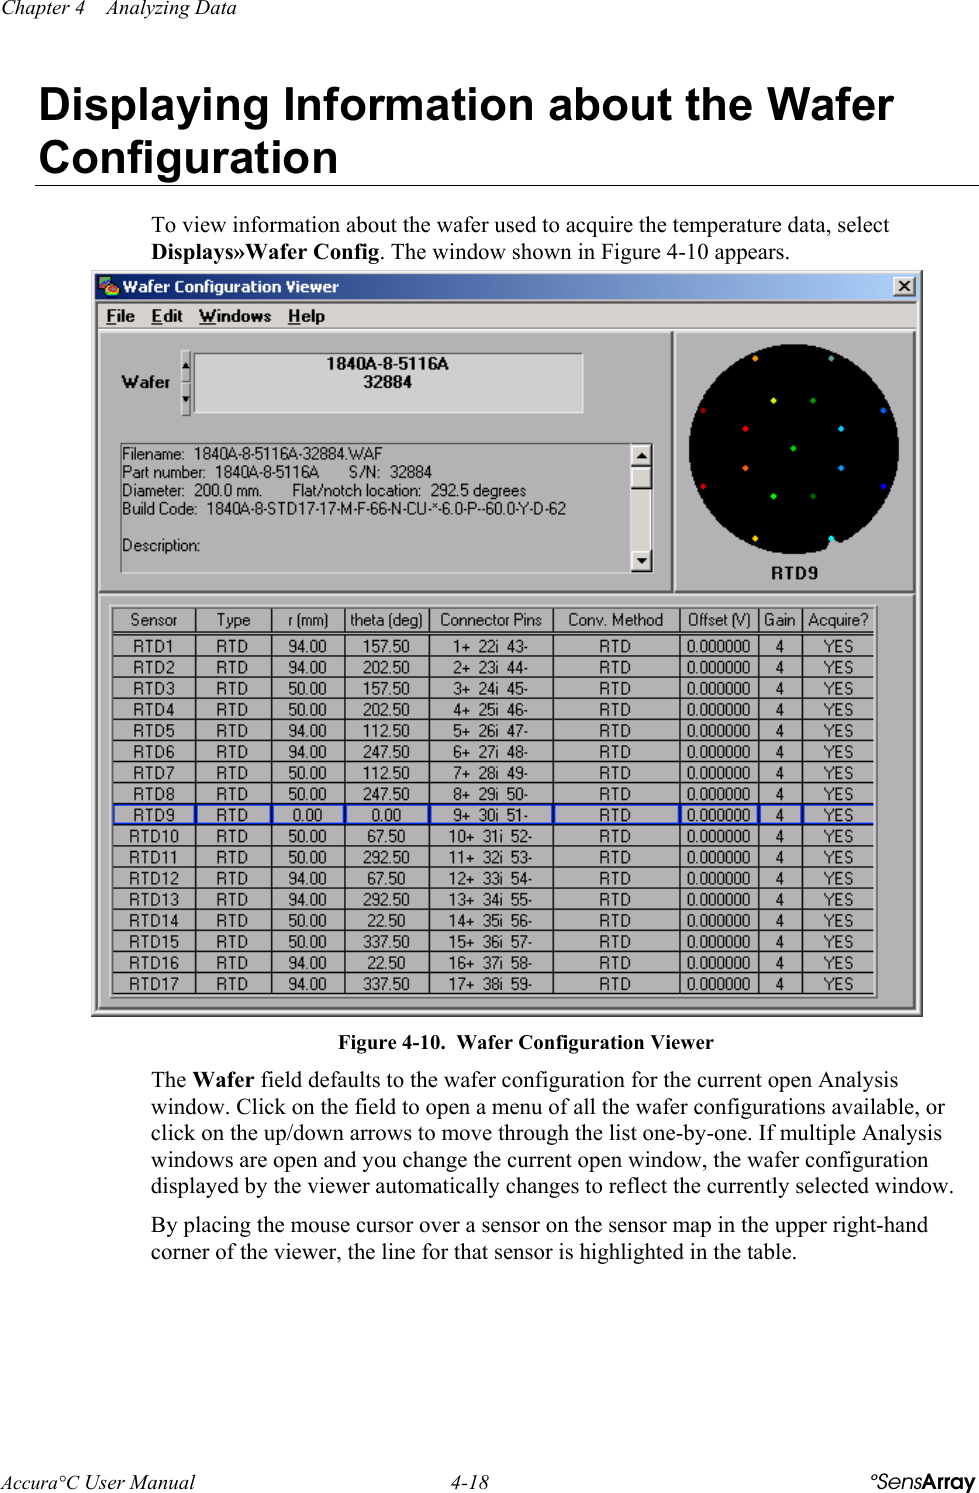 Chapter 4    Analyzing Data Accura°C User Manual  4-18  °SensArray Displaying Information about the Wafer Configuration To view information about the wafer used to acquire the temperature data, select Displays»Wafer Config. The window shown in Figure 4-10 appears.  Figure 4-10.  Wafer Configuration Viewer The Wafer field defaults to the wafer configuration for the current open Analysis window. Click on the field to open a menu of all the wafer configurations available, or click on the up/down arrows to move through the list one-by-one. If multiple Analysis windows are open and you change the current open window, the wafer configuration displayed by the viewer automatically changes to reflect the currently selected window. By placing the mouse cursor over a sensor on the sensor map in the upper right-hand corner of the viewer, the line for that sensor is highlighted in the table.  